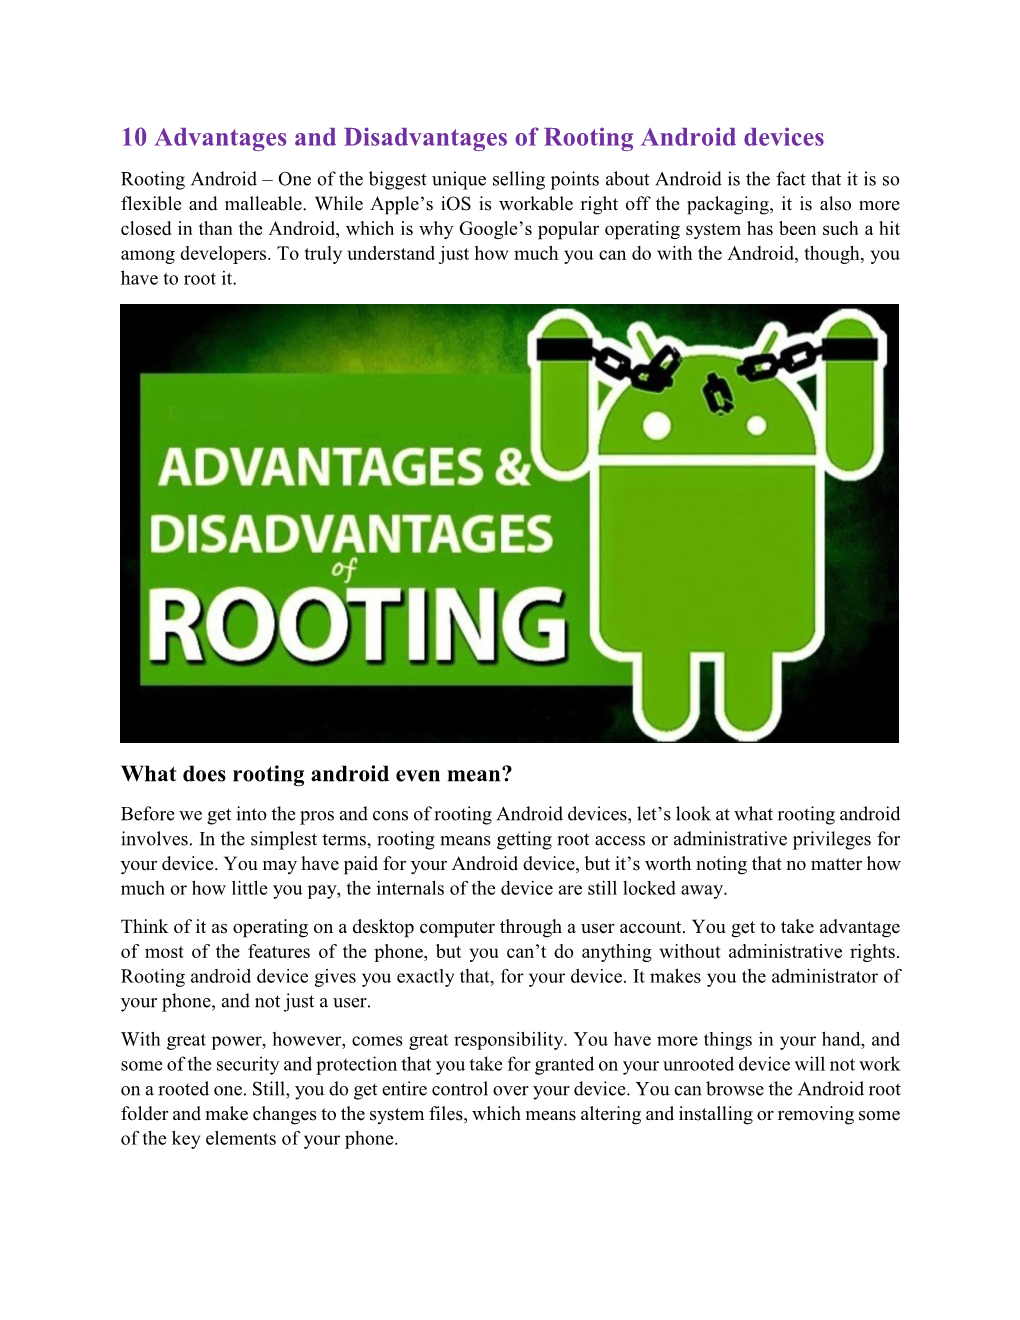 10 Advantages and Disadvantages of Rooting Android Devices